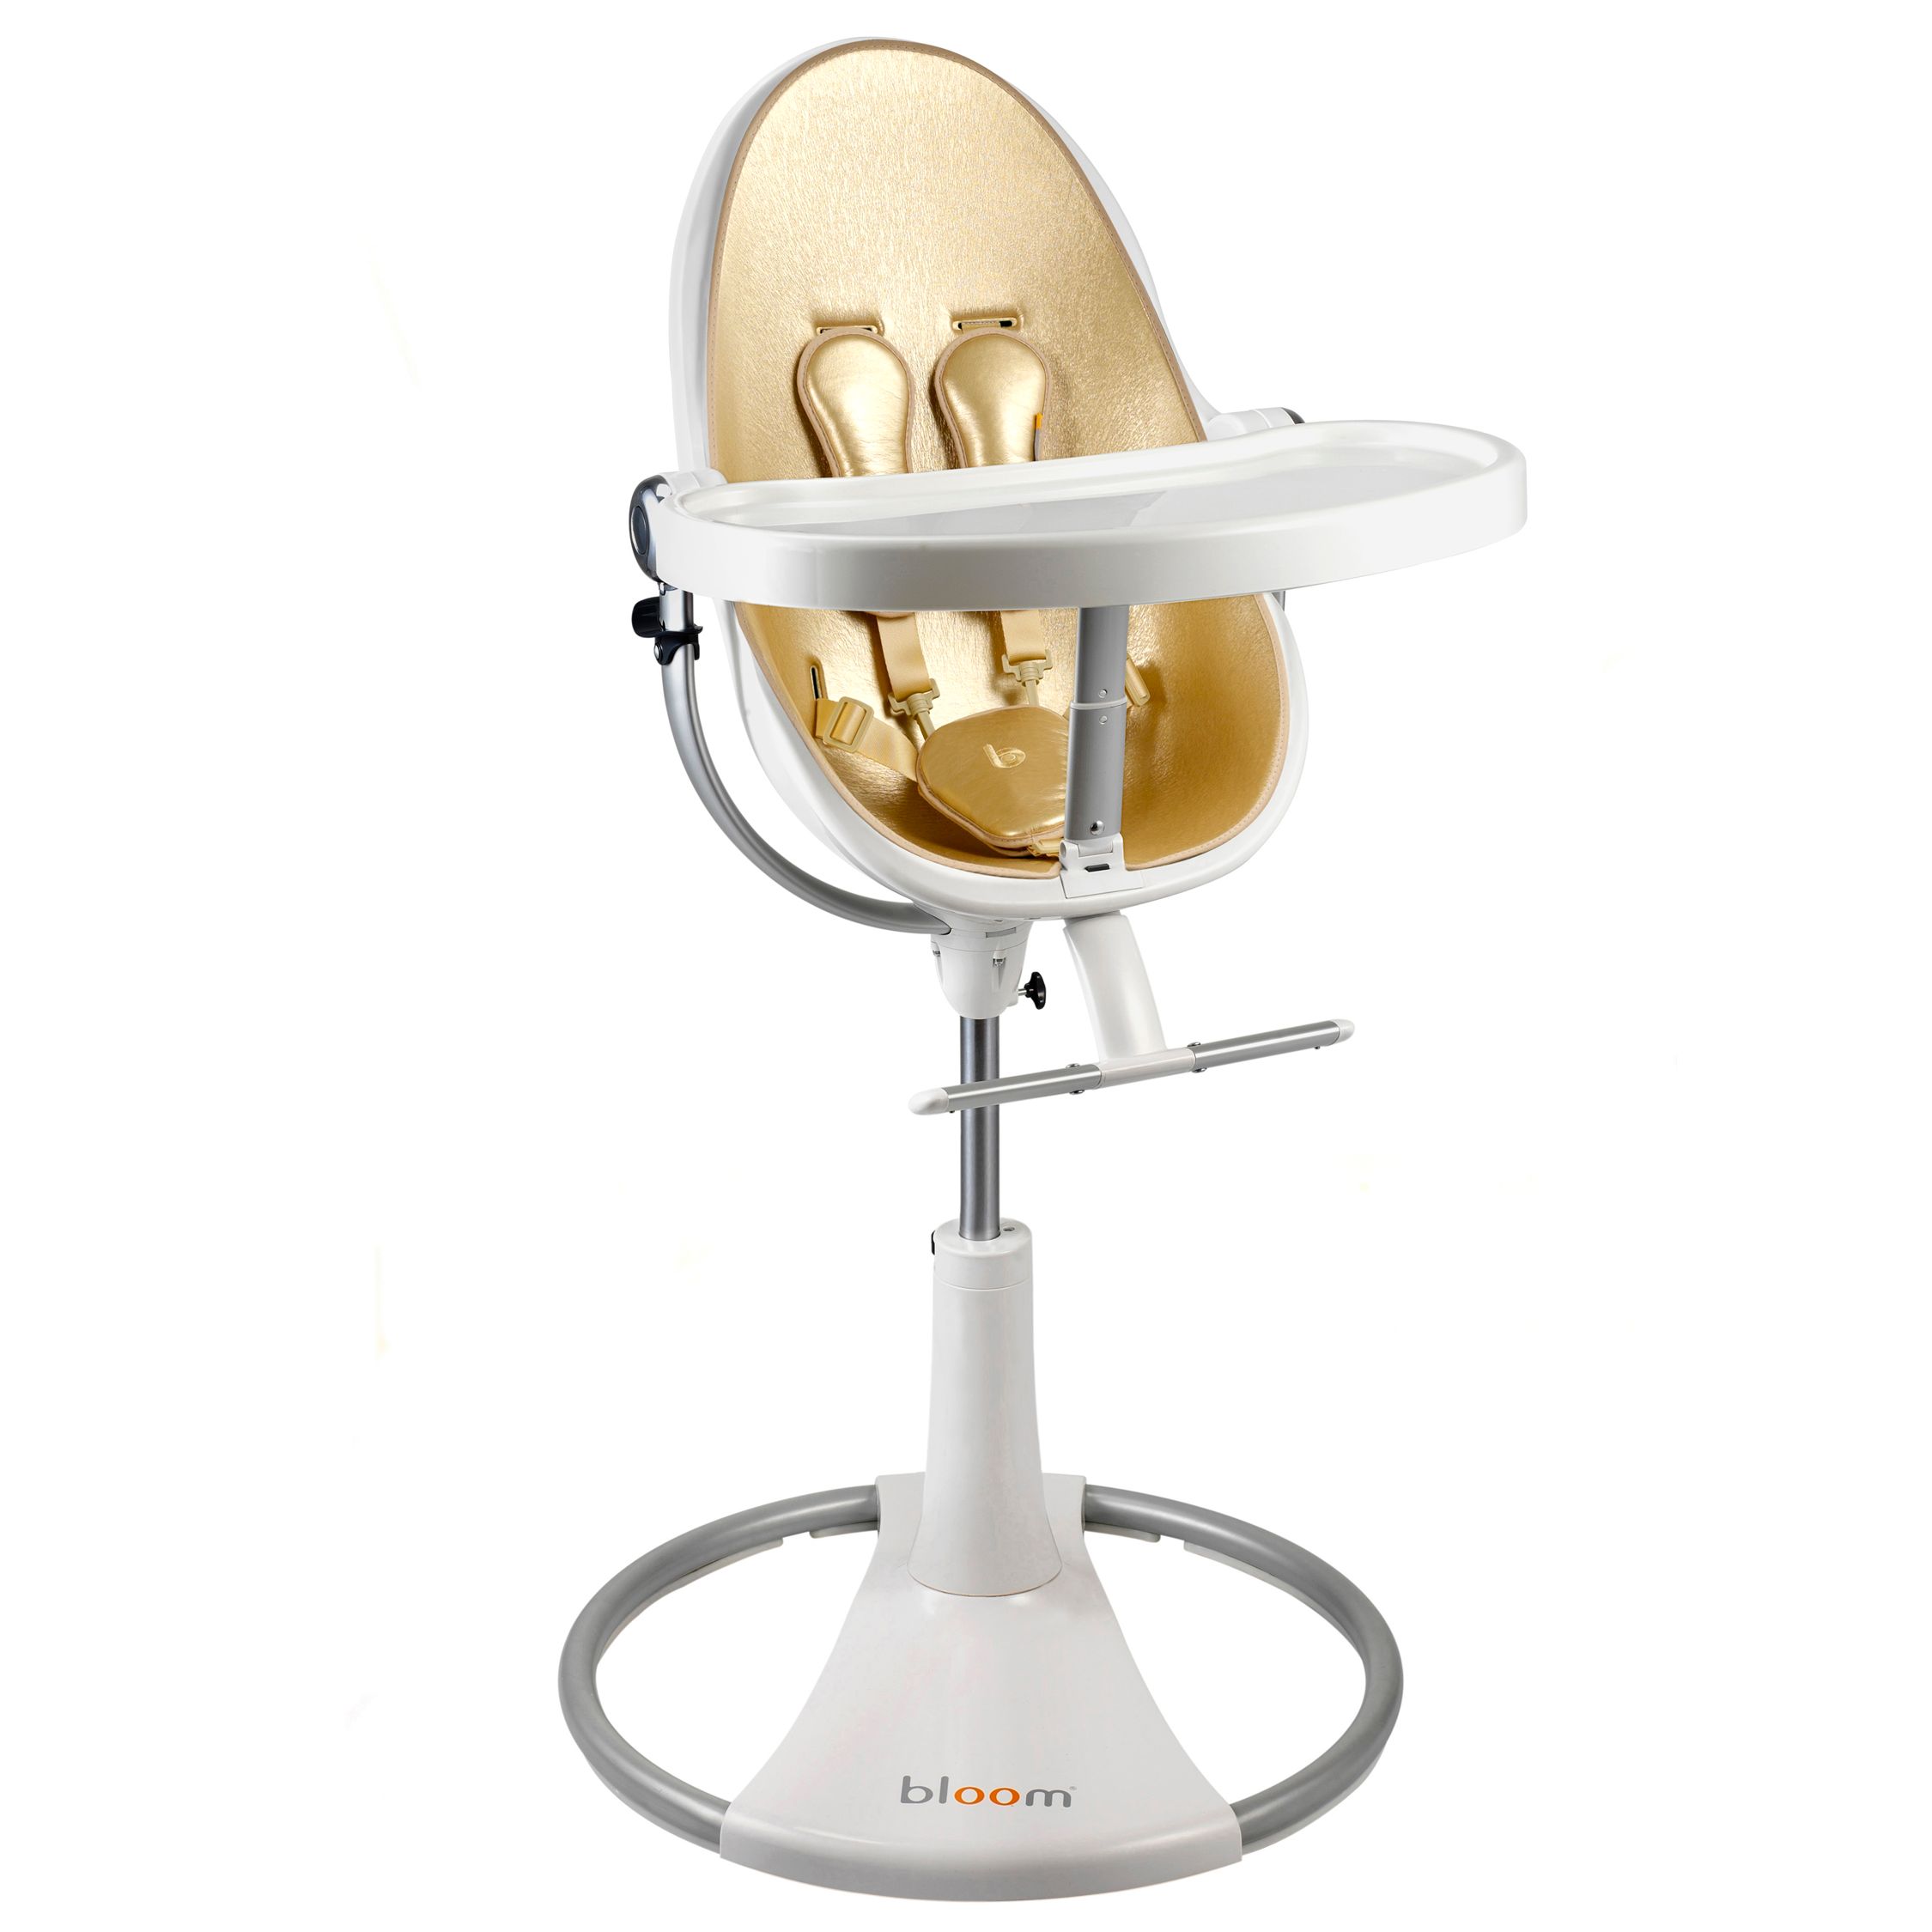 bloom Fresco Loft Contemporary Leatherette Baby Chair, Ivory White with Solar Gold at John Lewis